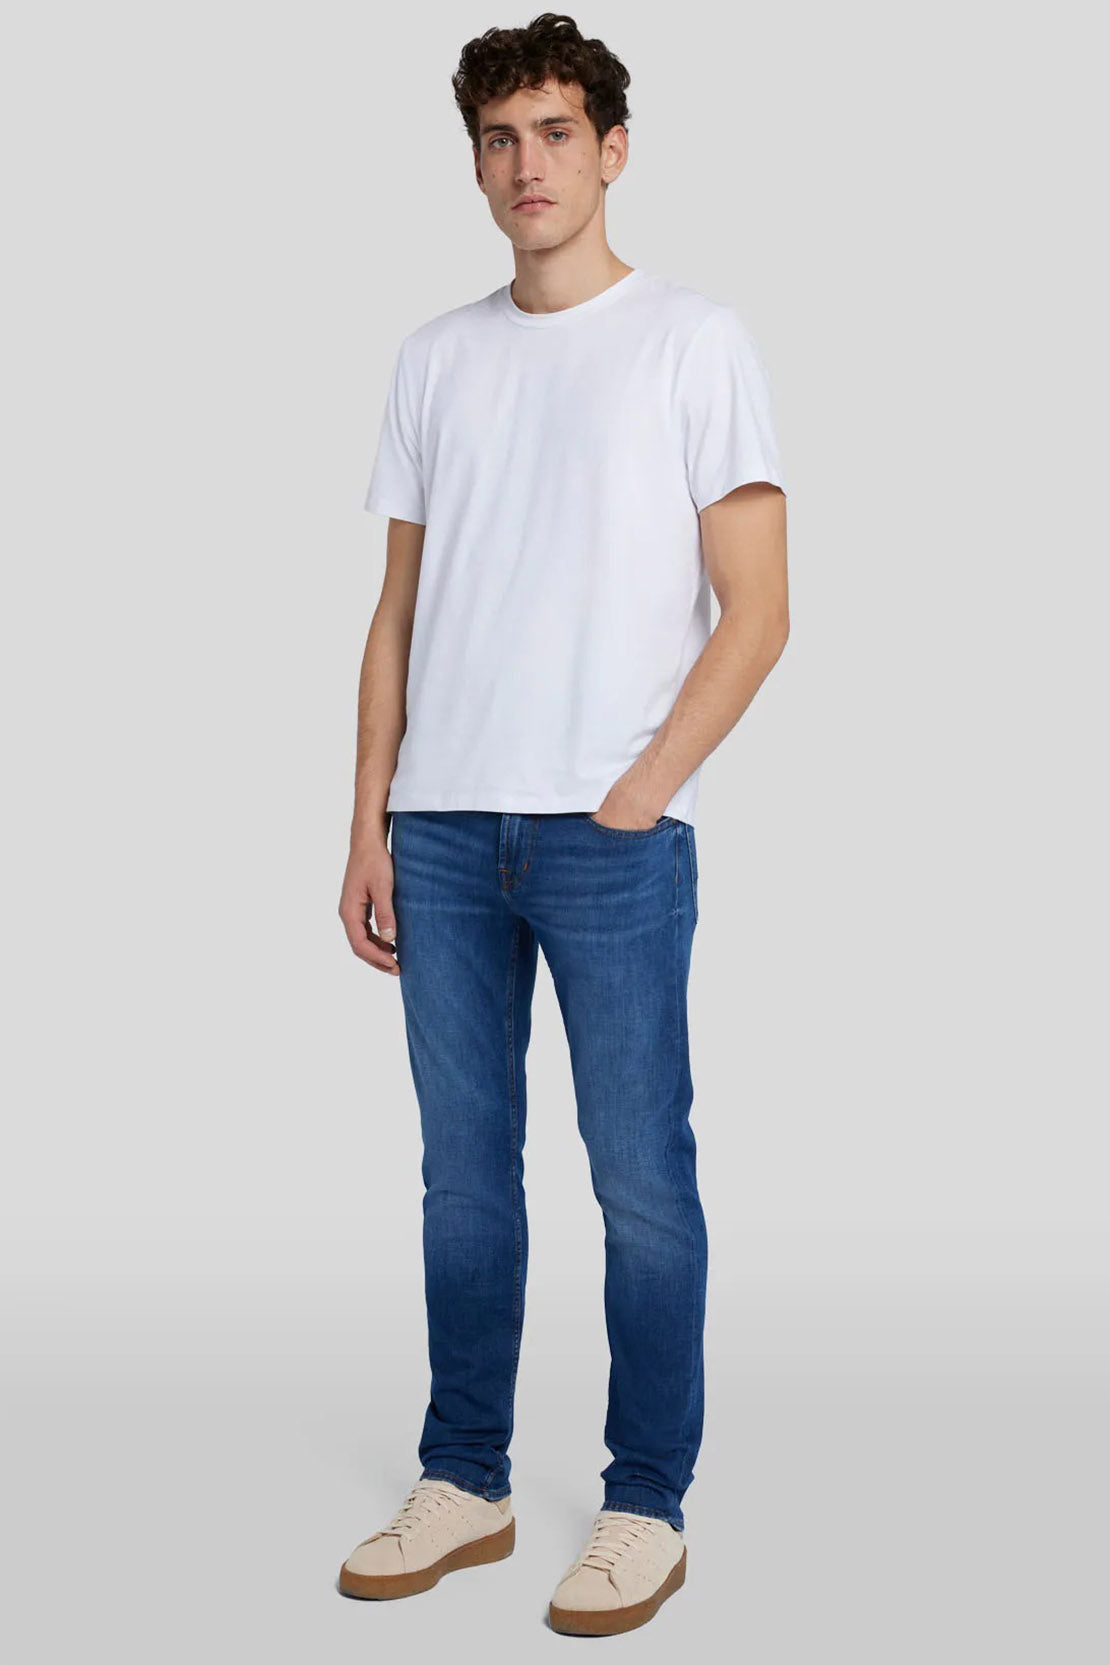 7 FOR ALL MANKIND - SLIMMY Left Hand Apogee Jeans in Mid Blue JSMSR510AG